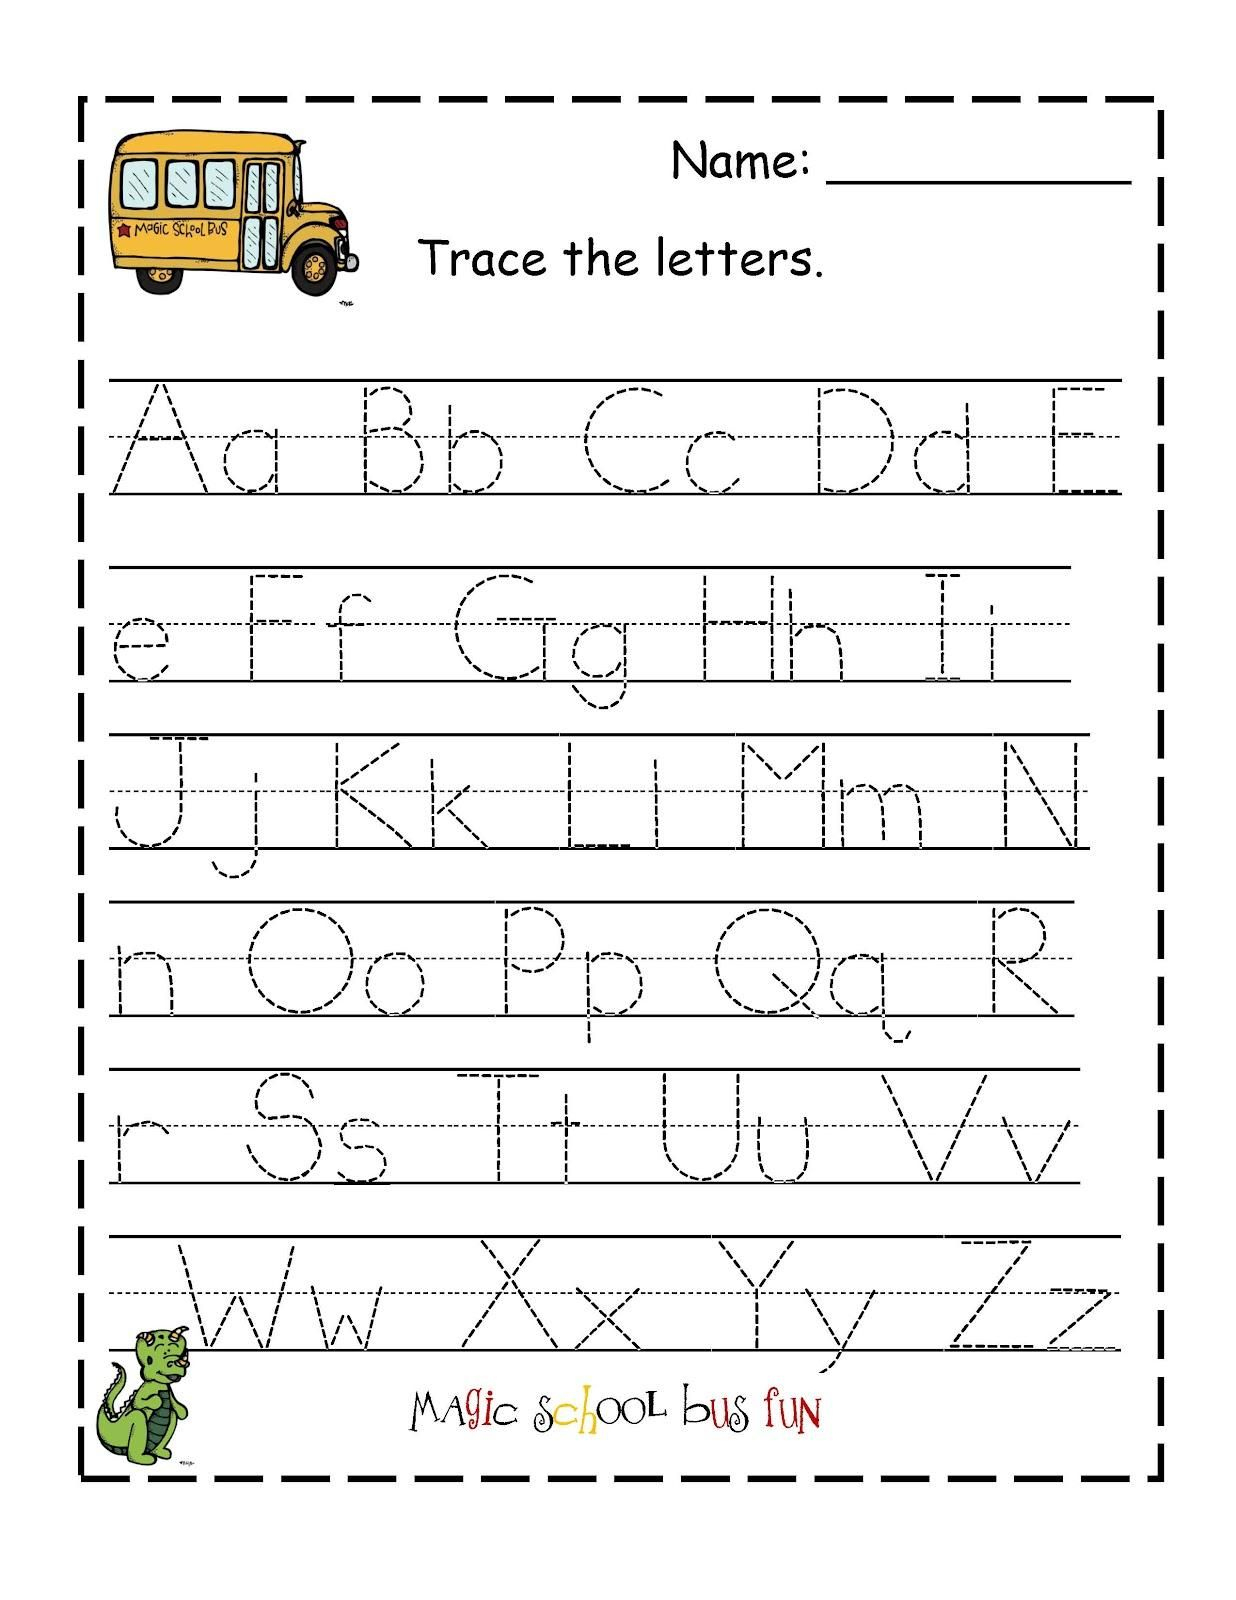 Free Printable Abc Tracing Worksheets #2 | Places To Visit - Free Printable Alphabet Worksheets